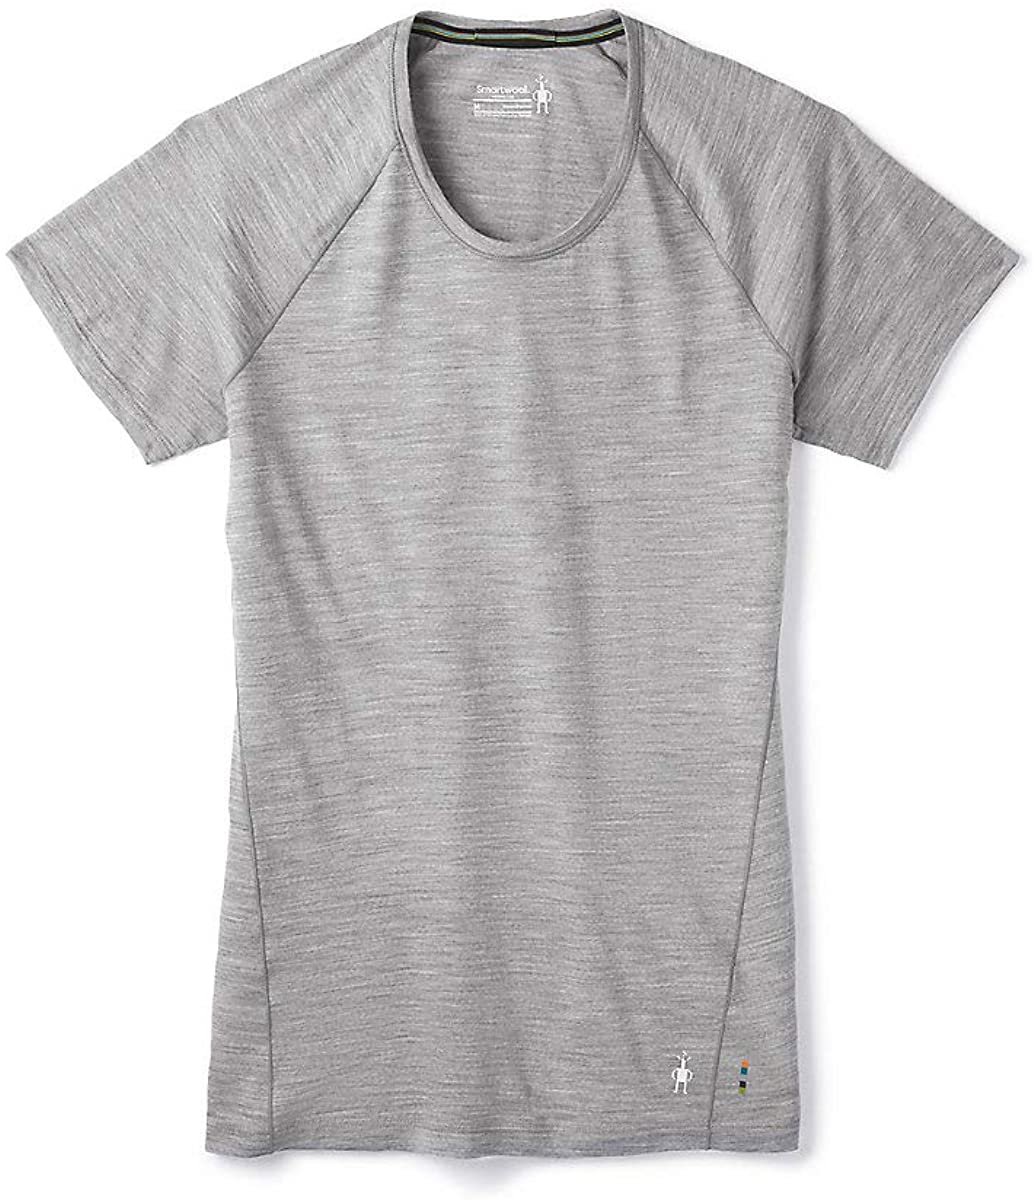 Women's Smartwool Merino 150 Base Layer Short Sleeve in Light Gray Heather from the side view